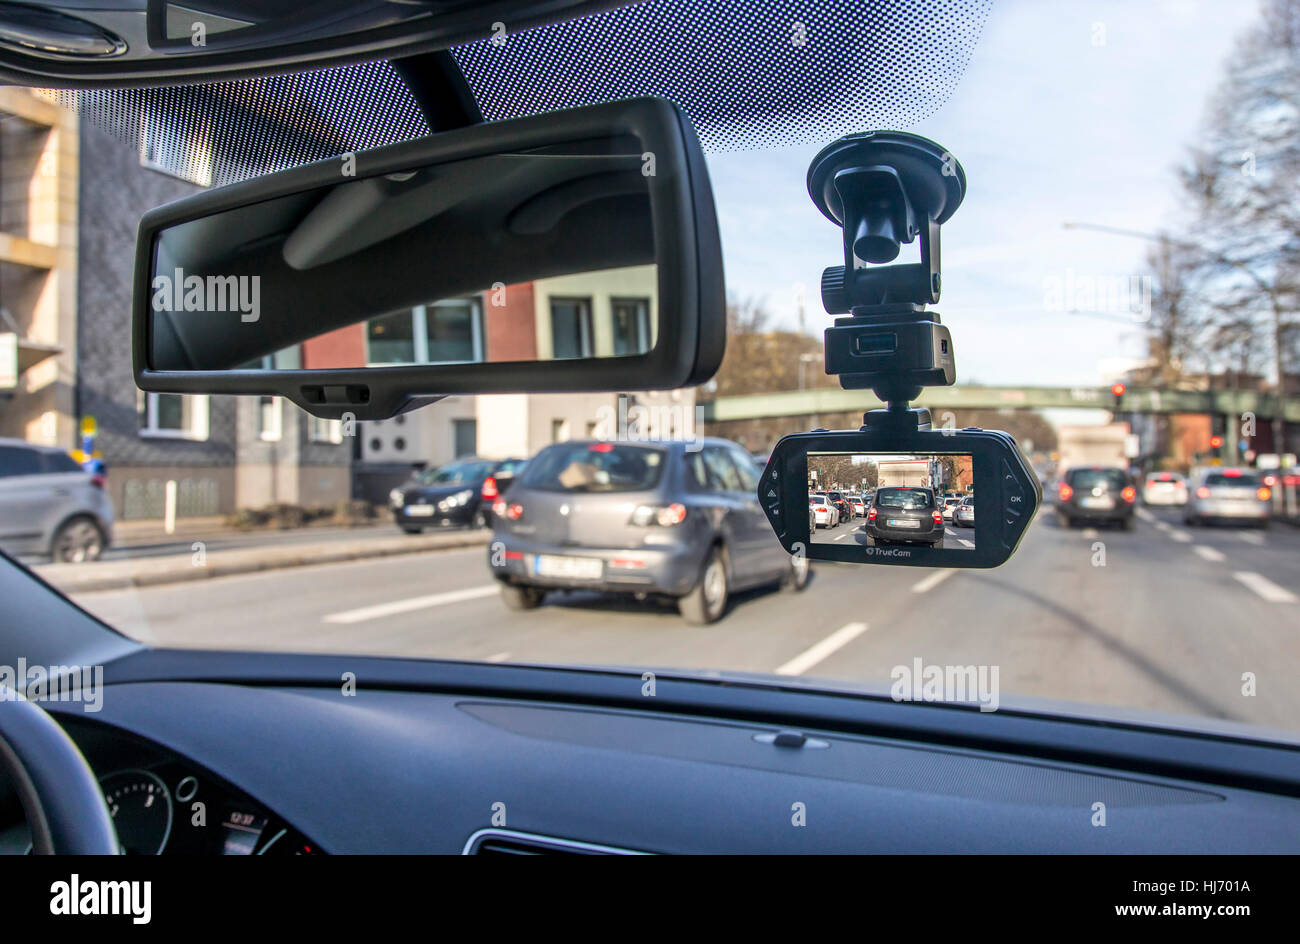 https://c8.alamy.com/comp/HJ701A/dashcam-in-a-passenger-car-video-camera-on-the-windshield-permanently-HJ701A.jpg